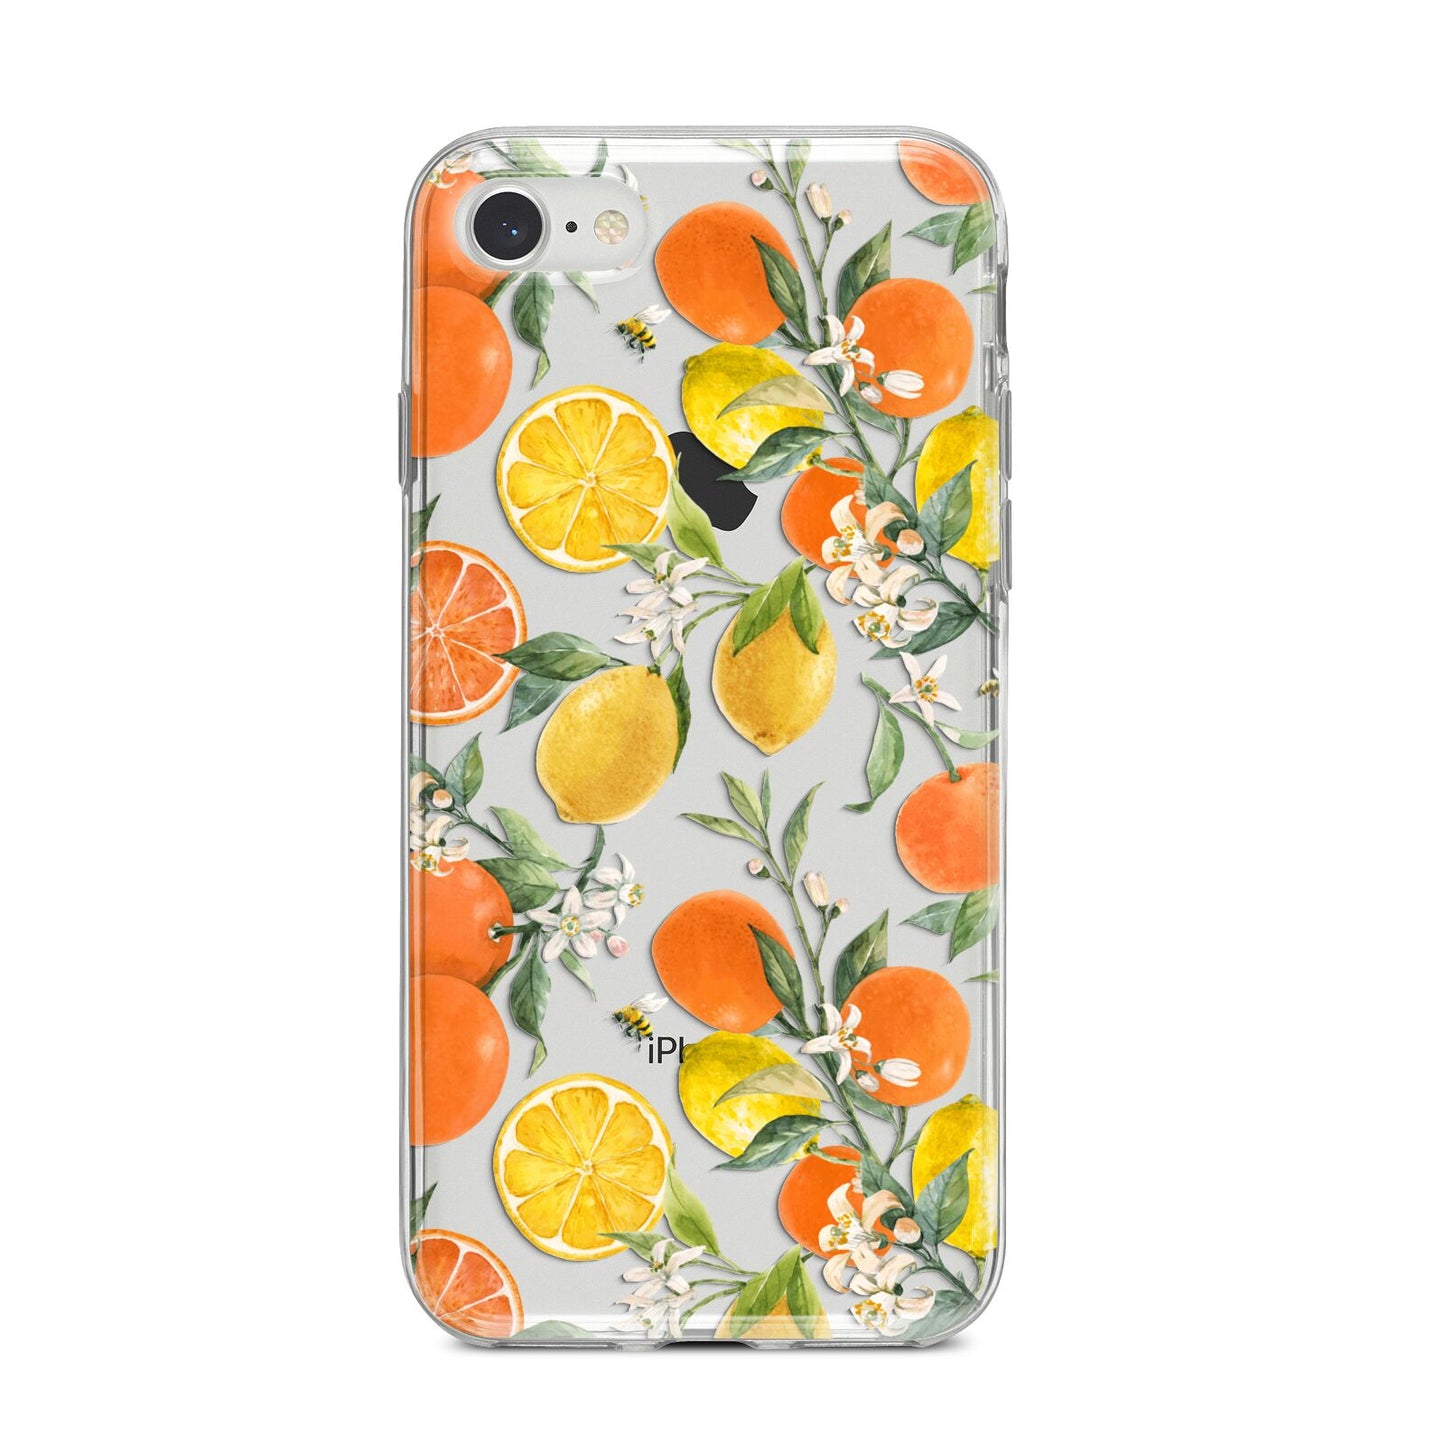 Lemons and Oranges iPhone 8 Bumper Case on Silver iPhone